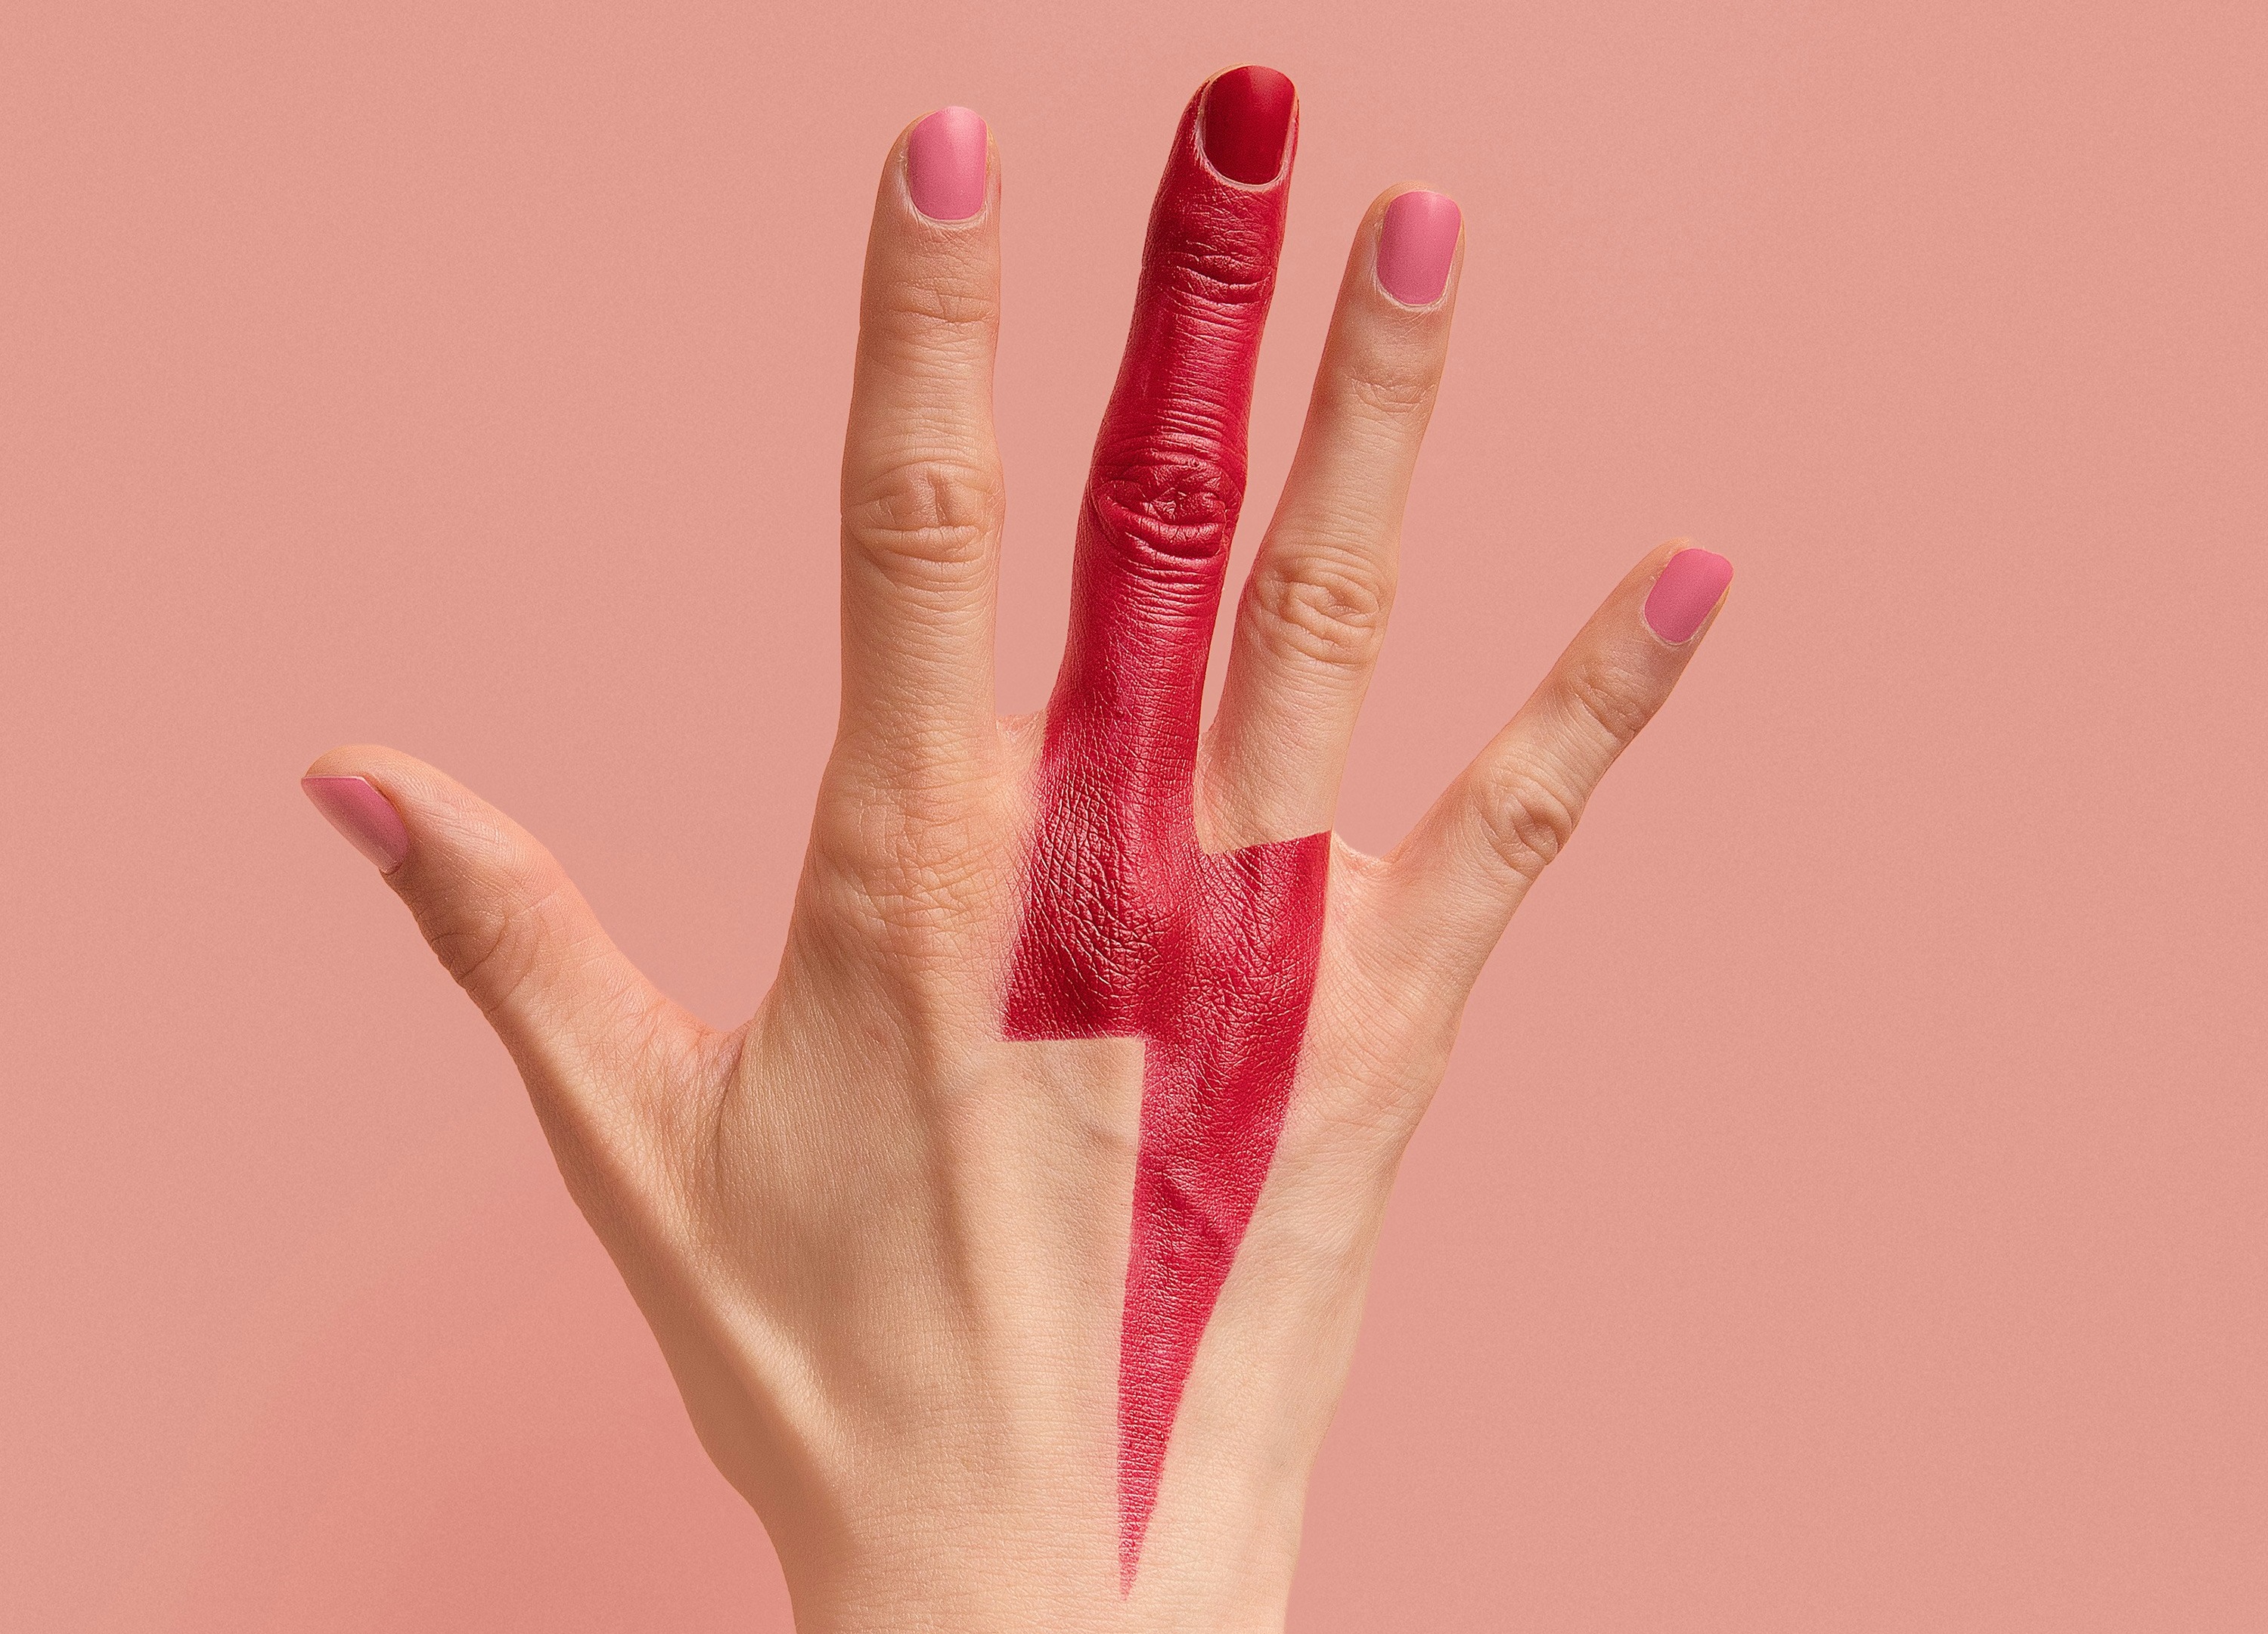 A hand with fingers outstretched, pink nail polish, and the middle finger painted red, which becomes a red lighning bolt on the back of the hand